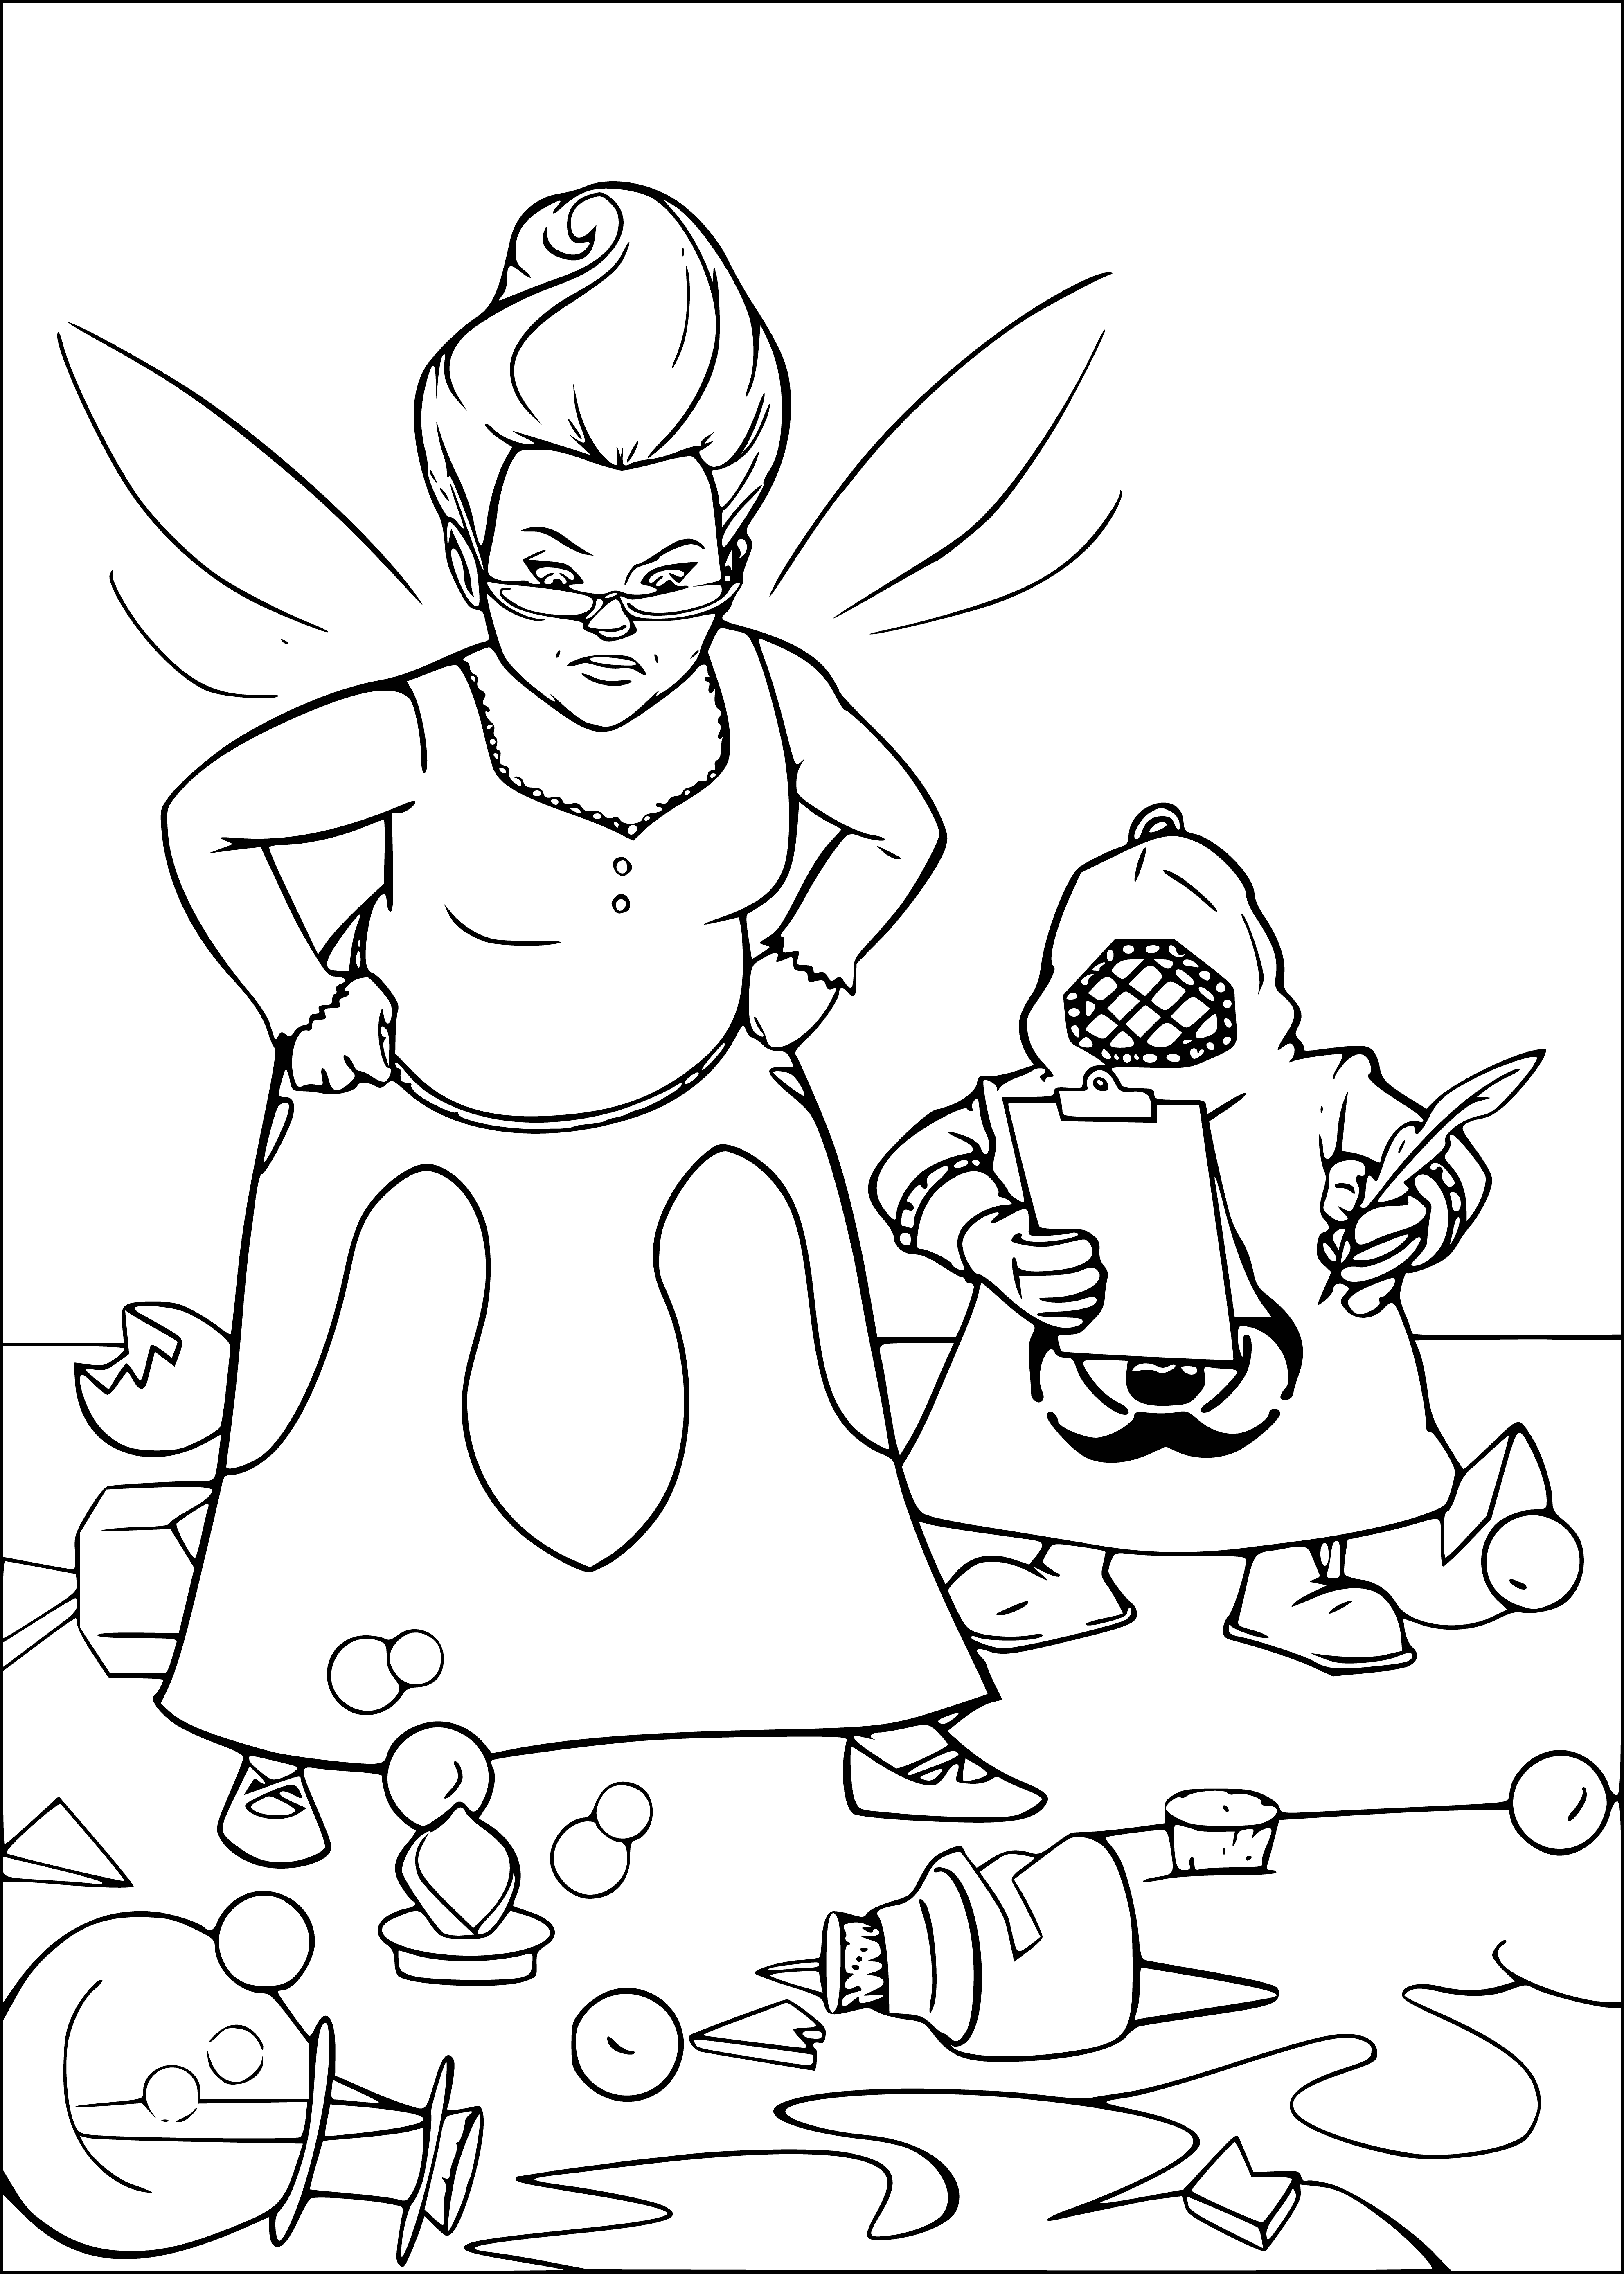 coloring page: Fairy Godmother; man w/short brown hair & beard. Wearing blue & red. Has pink wand. #Shrek